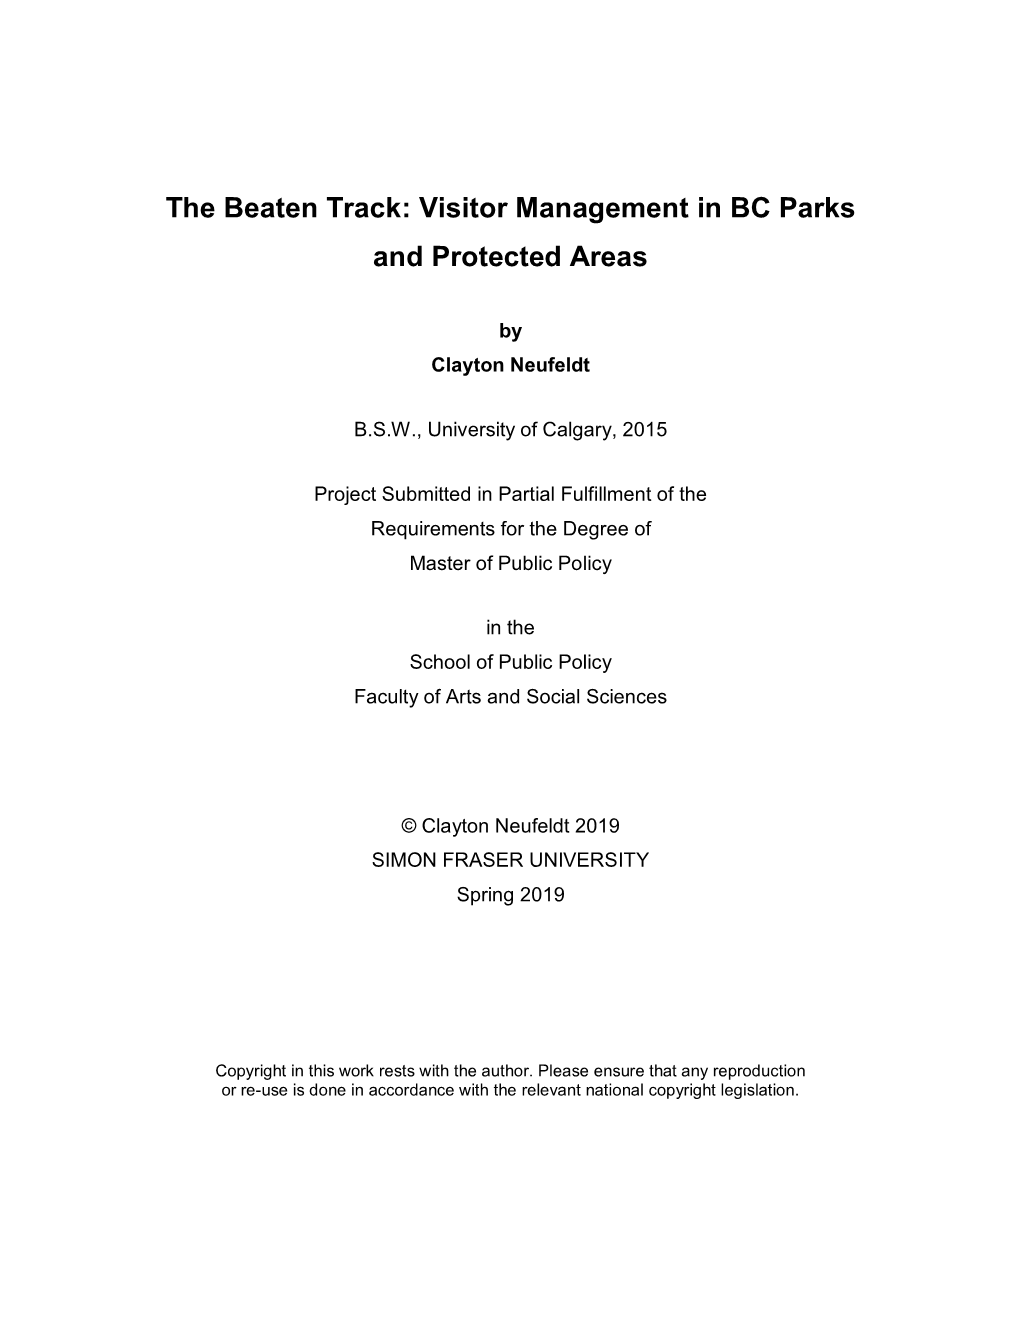 Visitor Management in BC Parks and Protected Areas